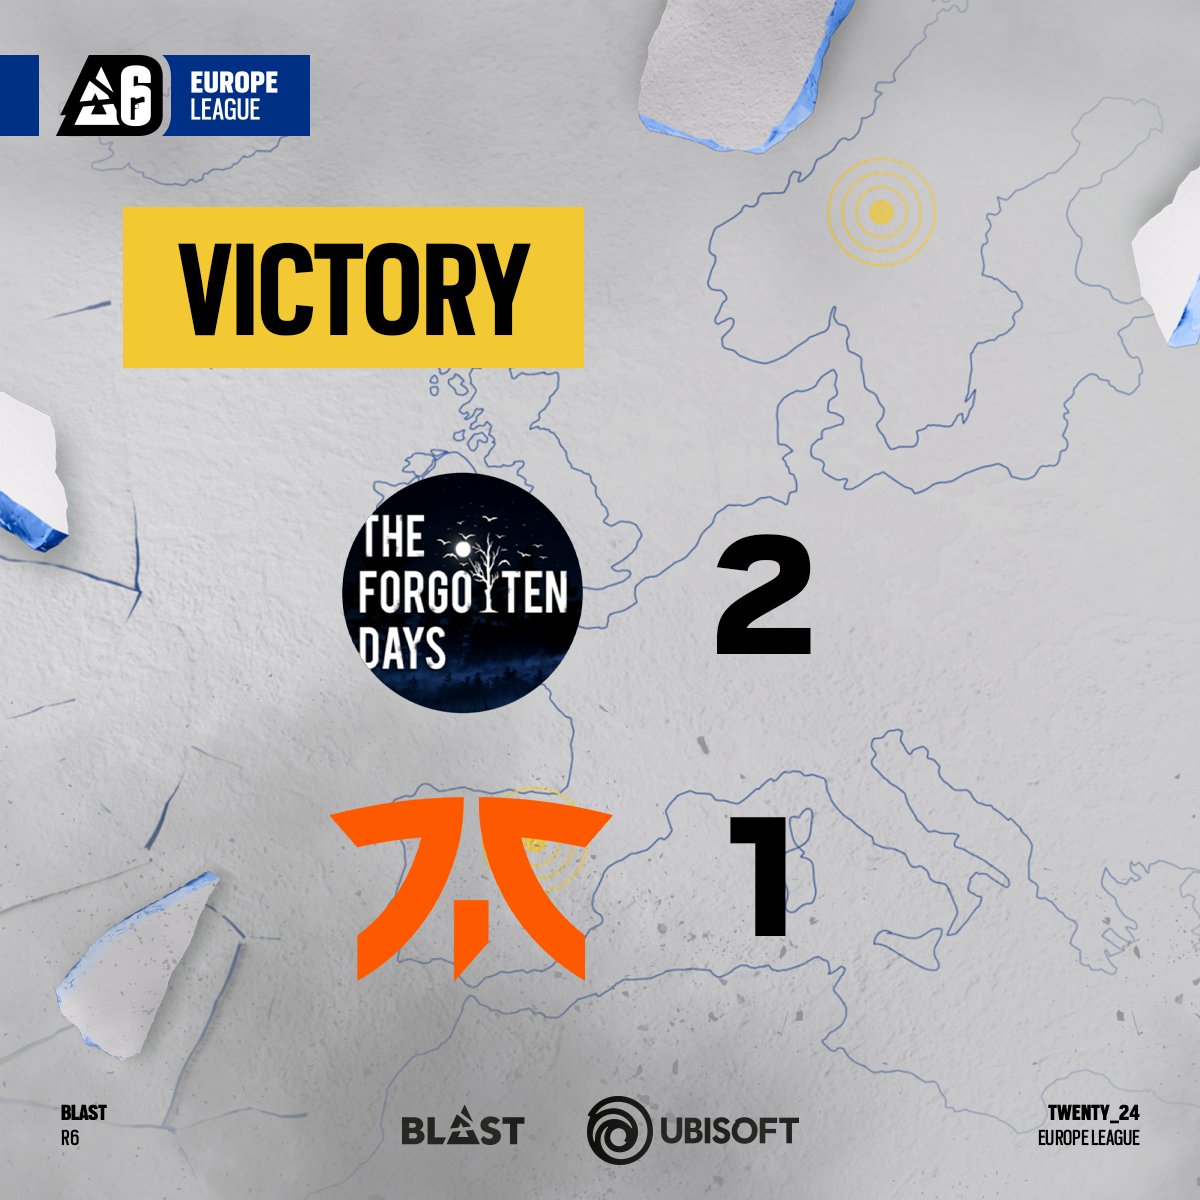 They just wanted it more 😤

The Forgotten Days take down @FNATIC, and continue to the LCQ Semifinals 🏆 #R6EUL